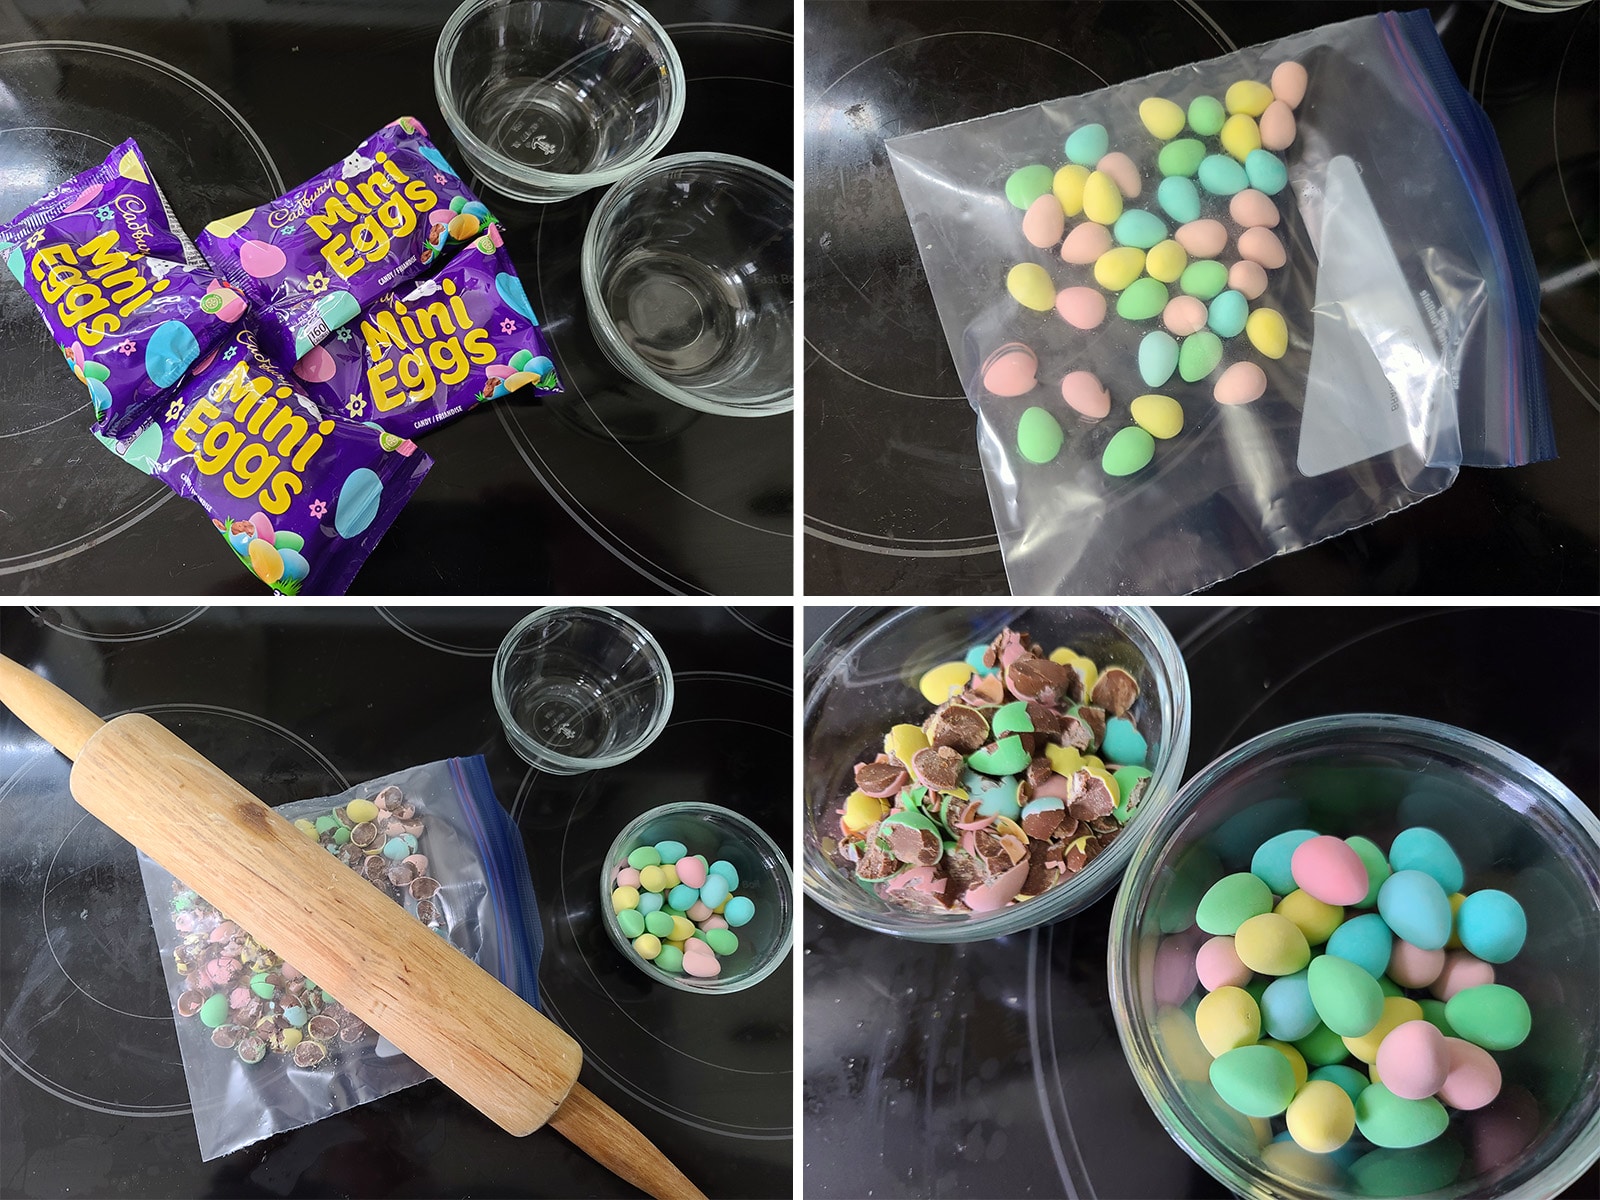 A 4 part image showing Cadbury mini eggs being crushed and put into small glass bowls.